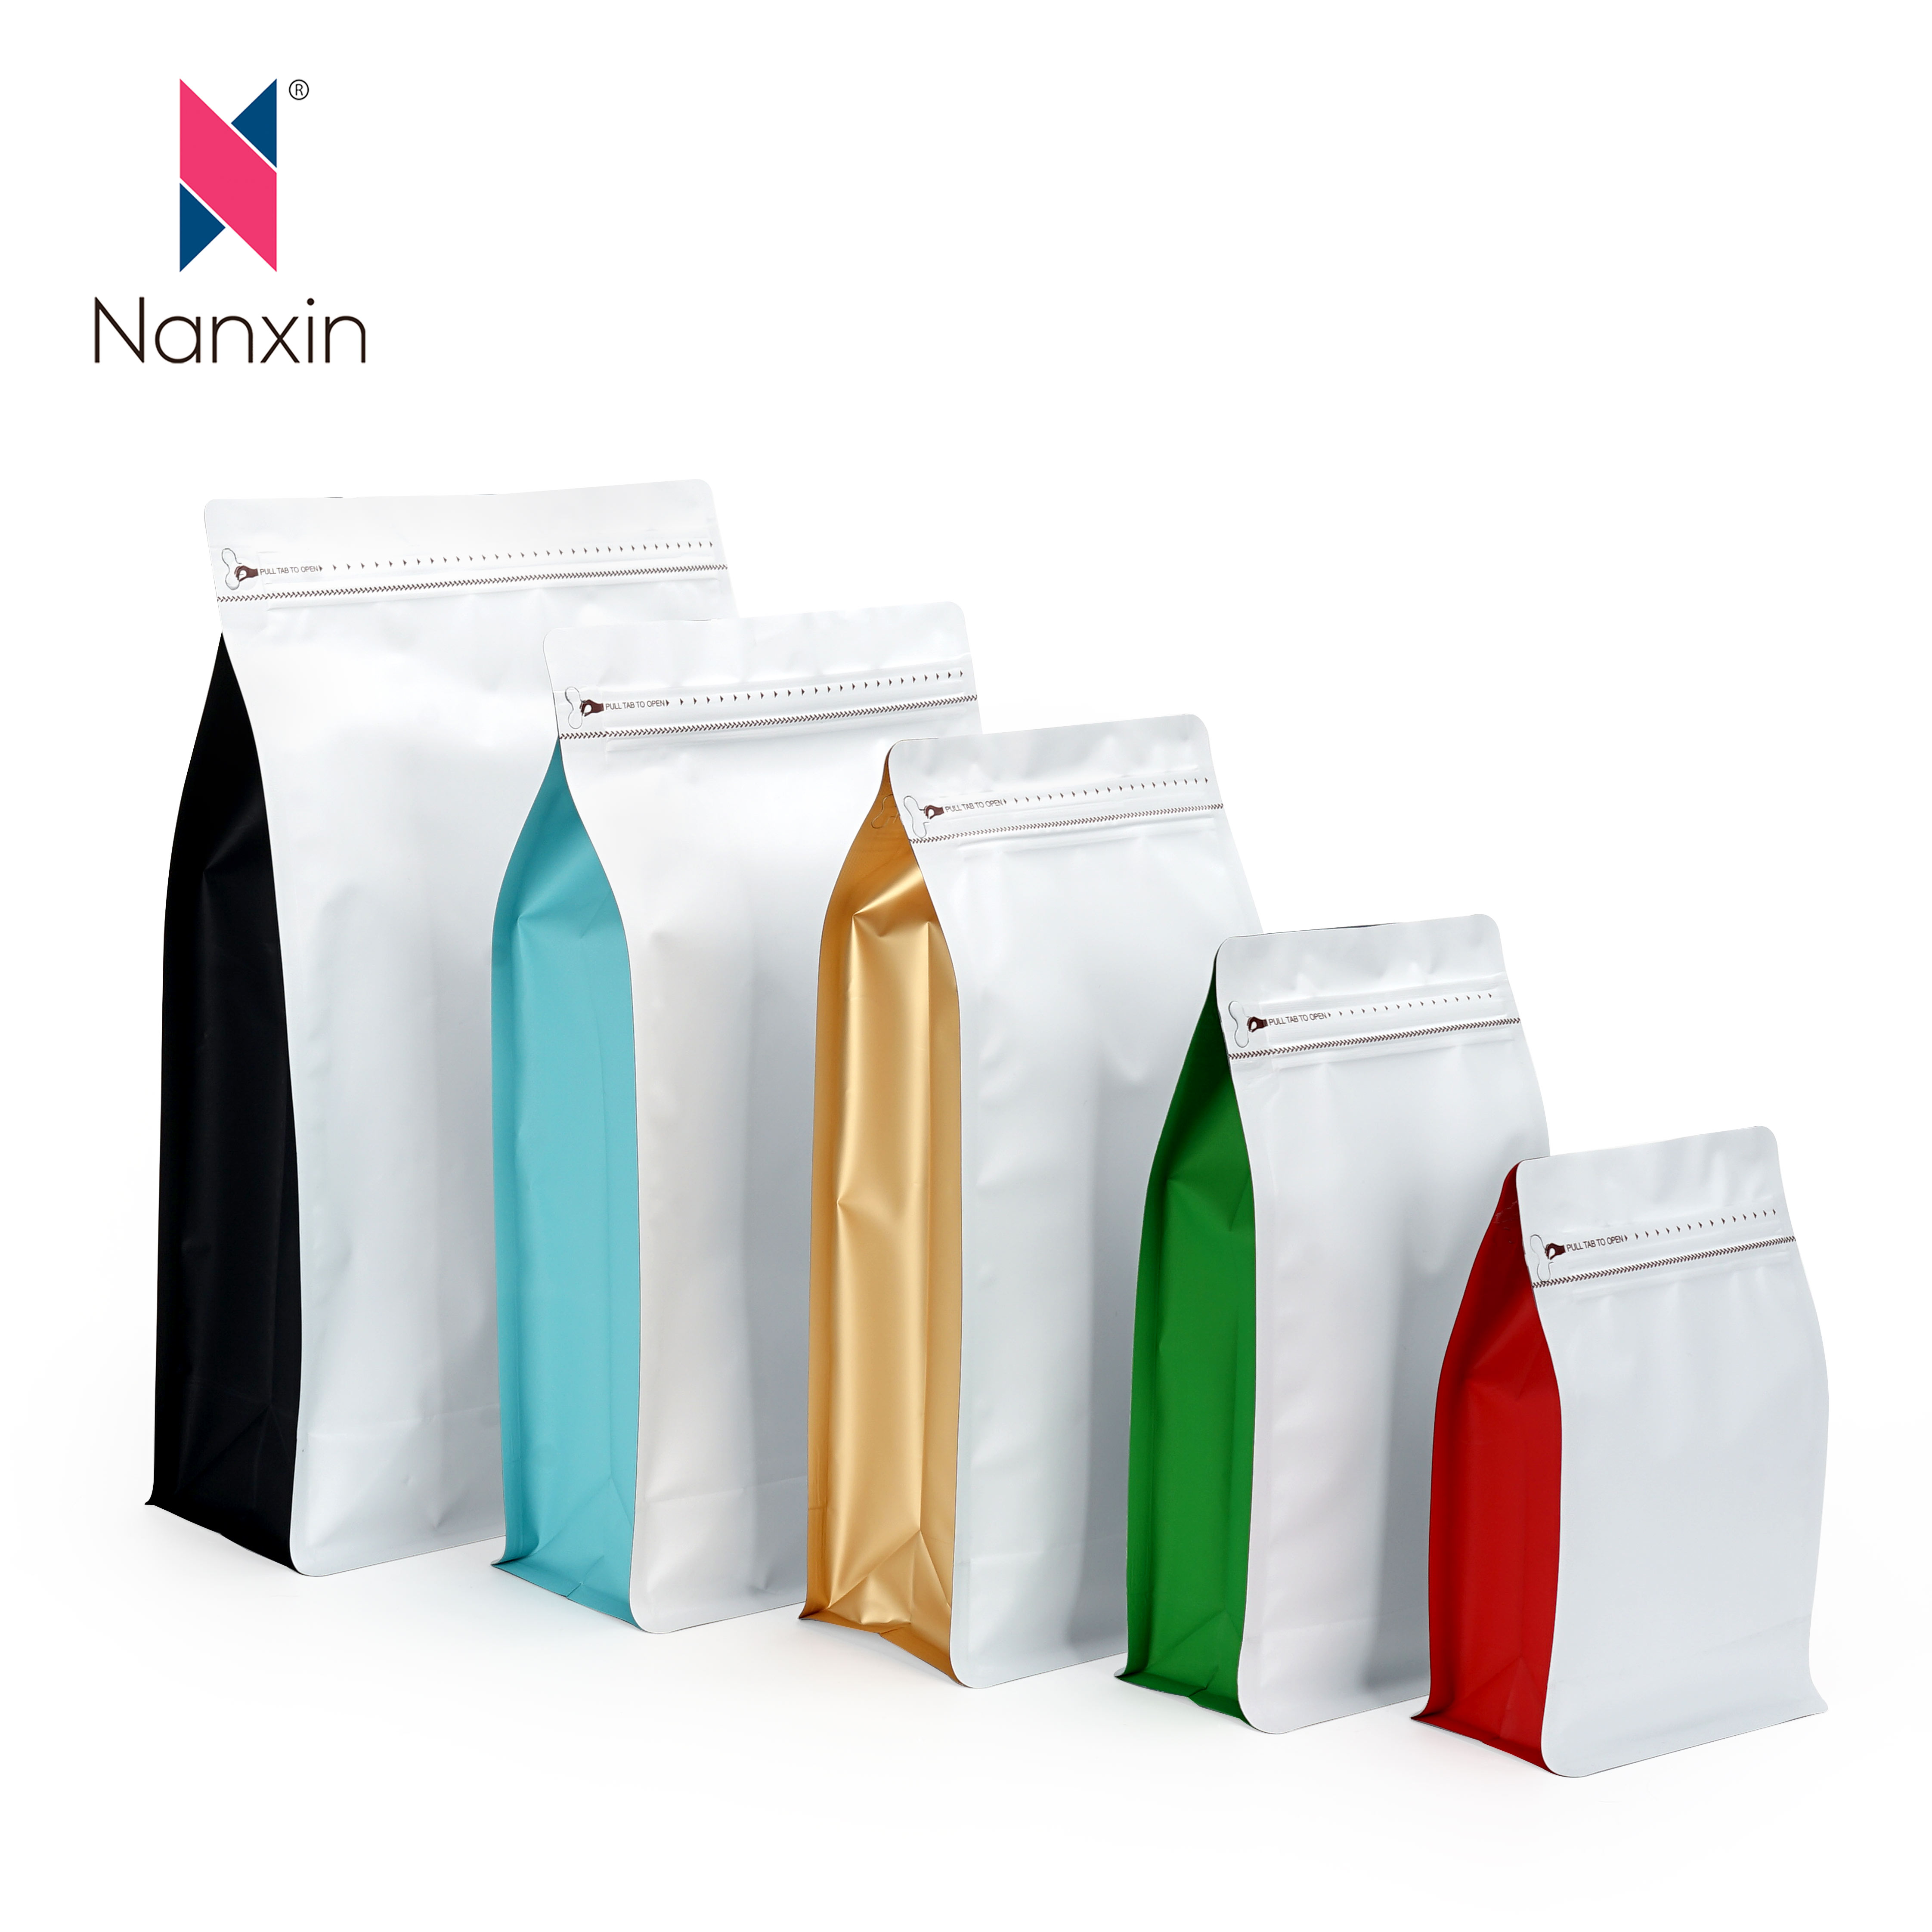 China Factory 1kg Coffee Bags With Valve And T-Zipper Flat Bottom Bag In Stock Many Colors For You To Choose Featured Image